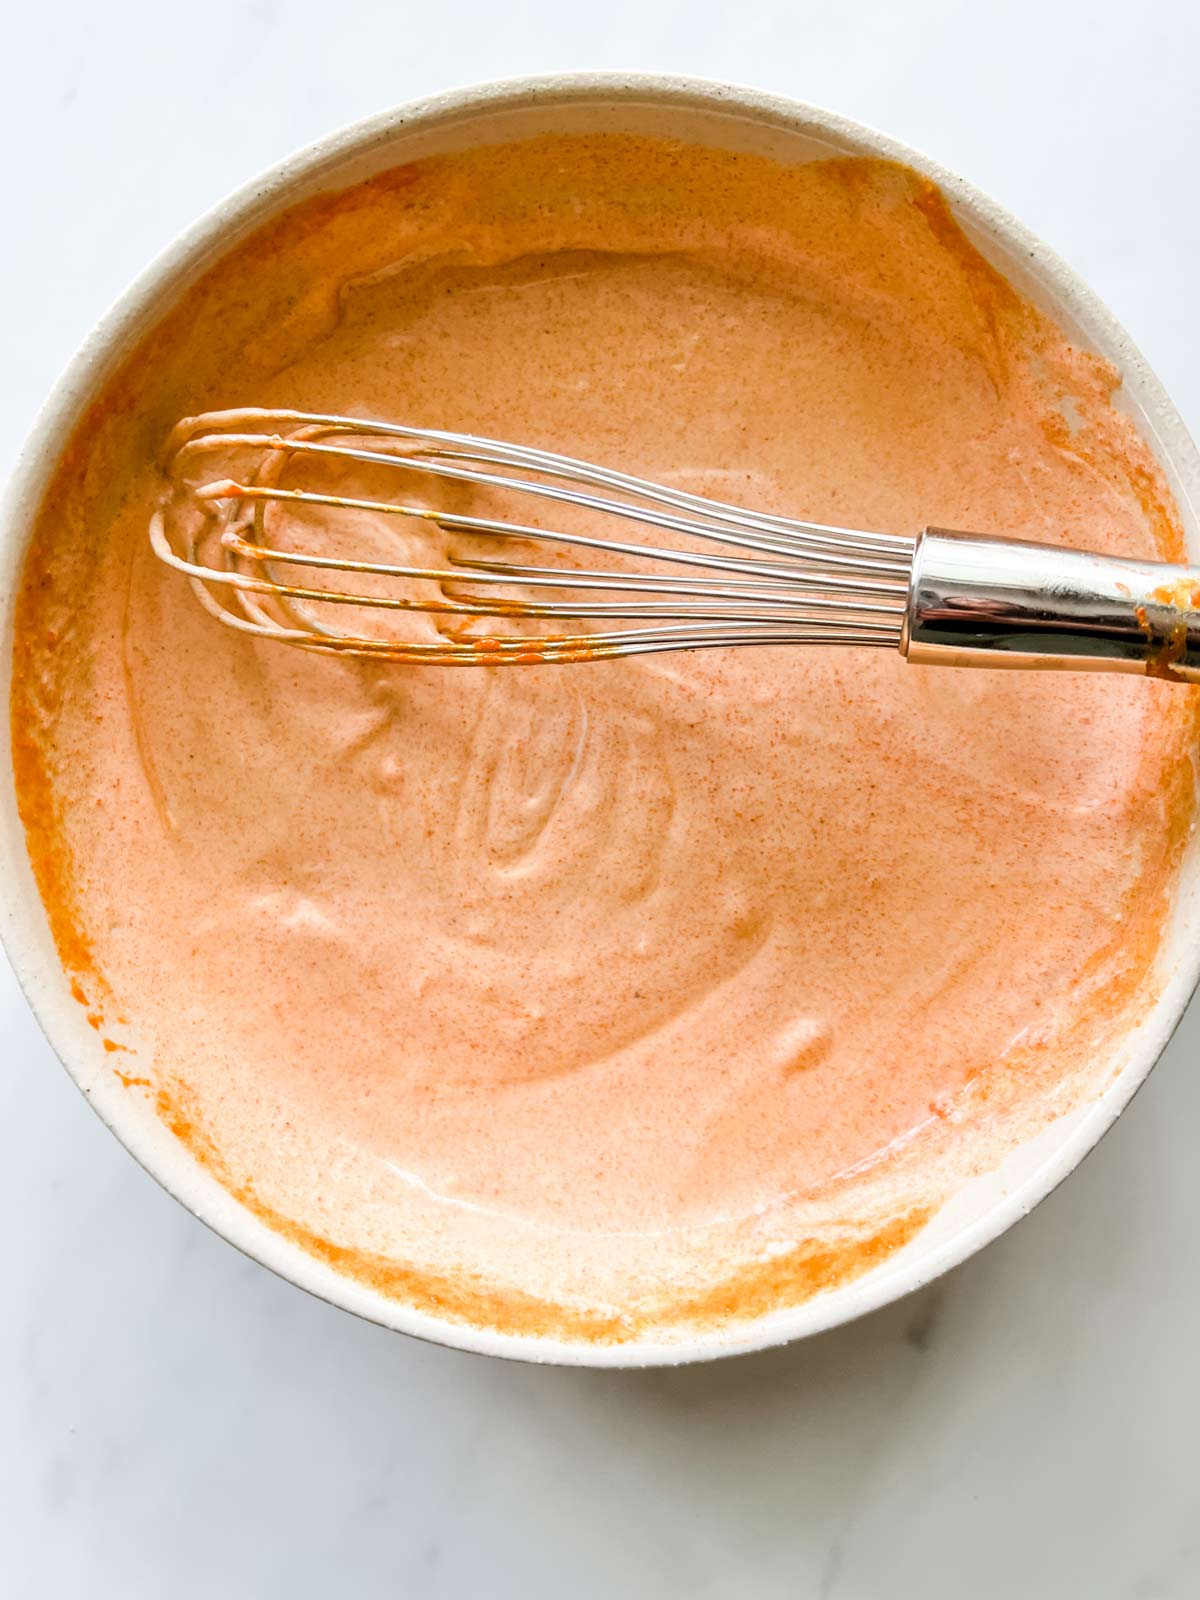 Creamy buffalo sauce with a whisk in a bowl.